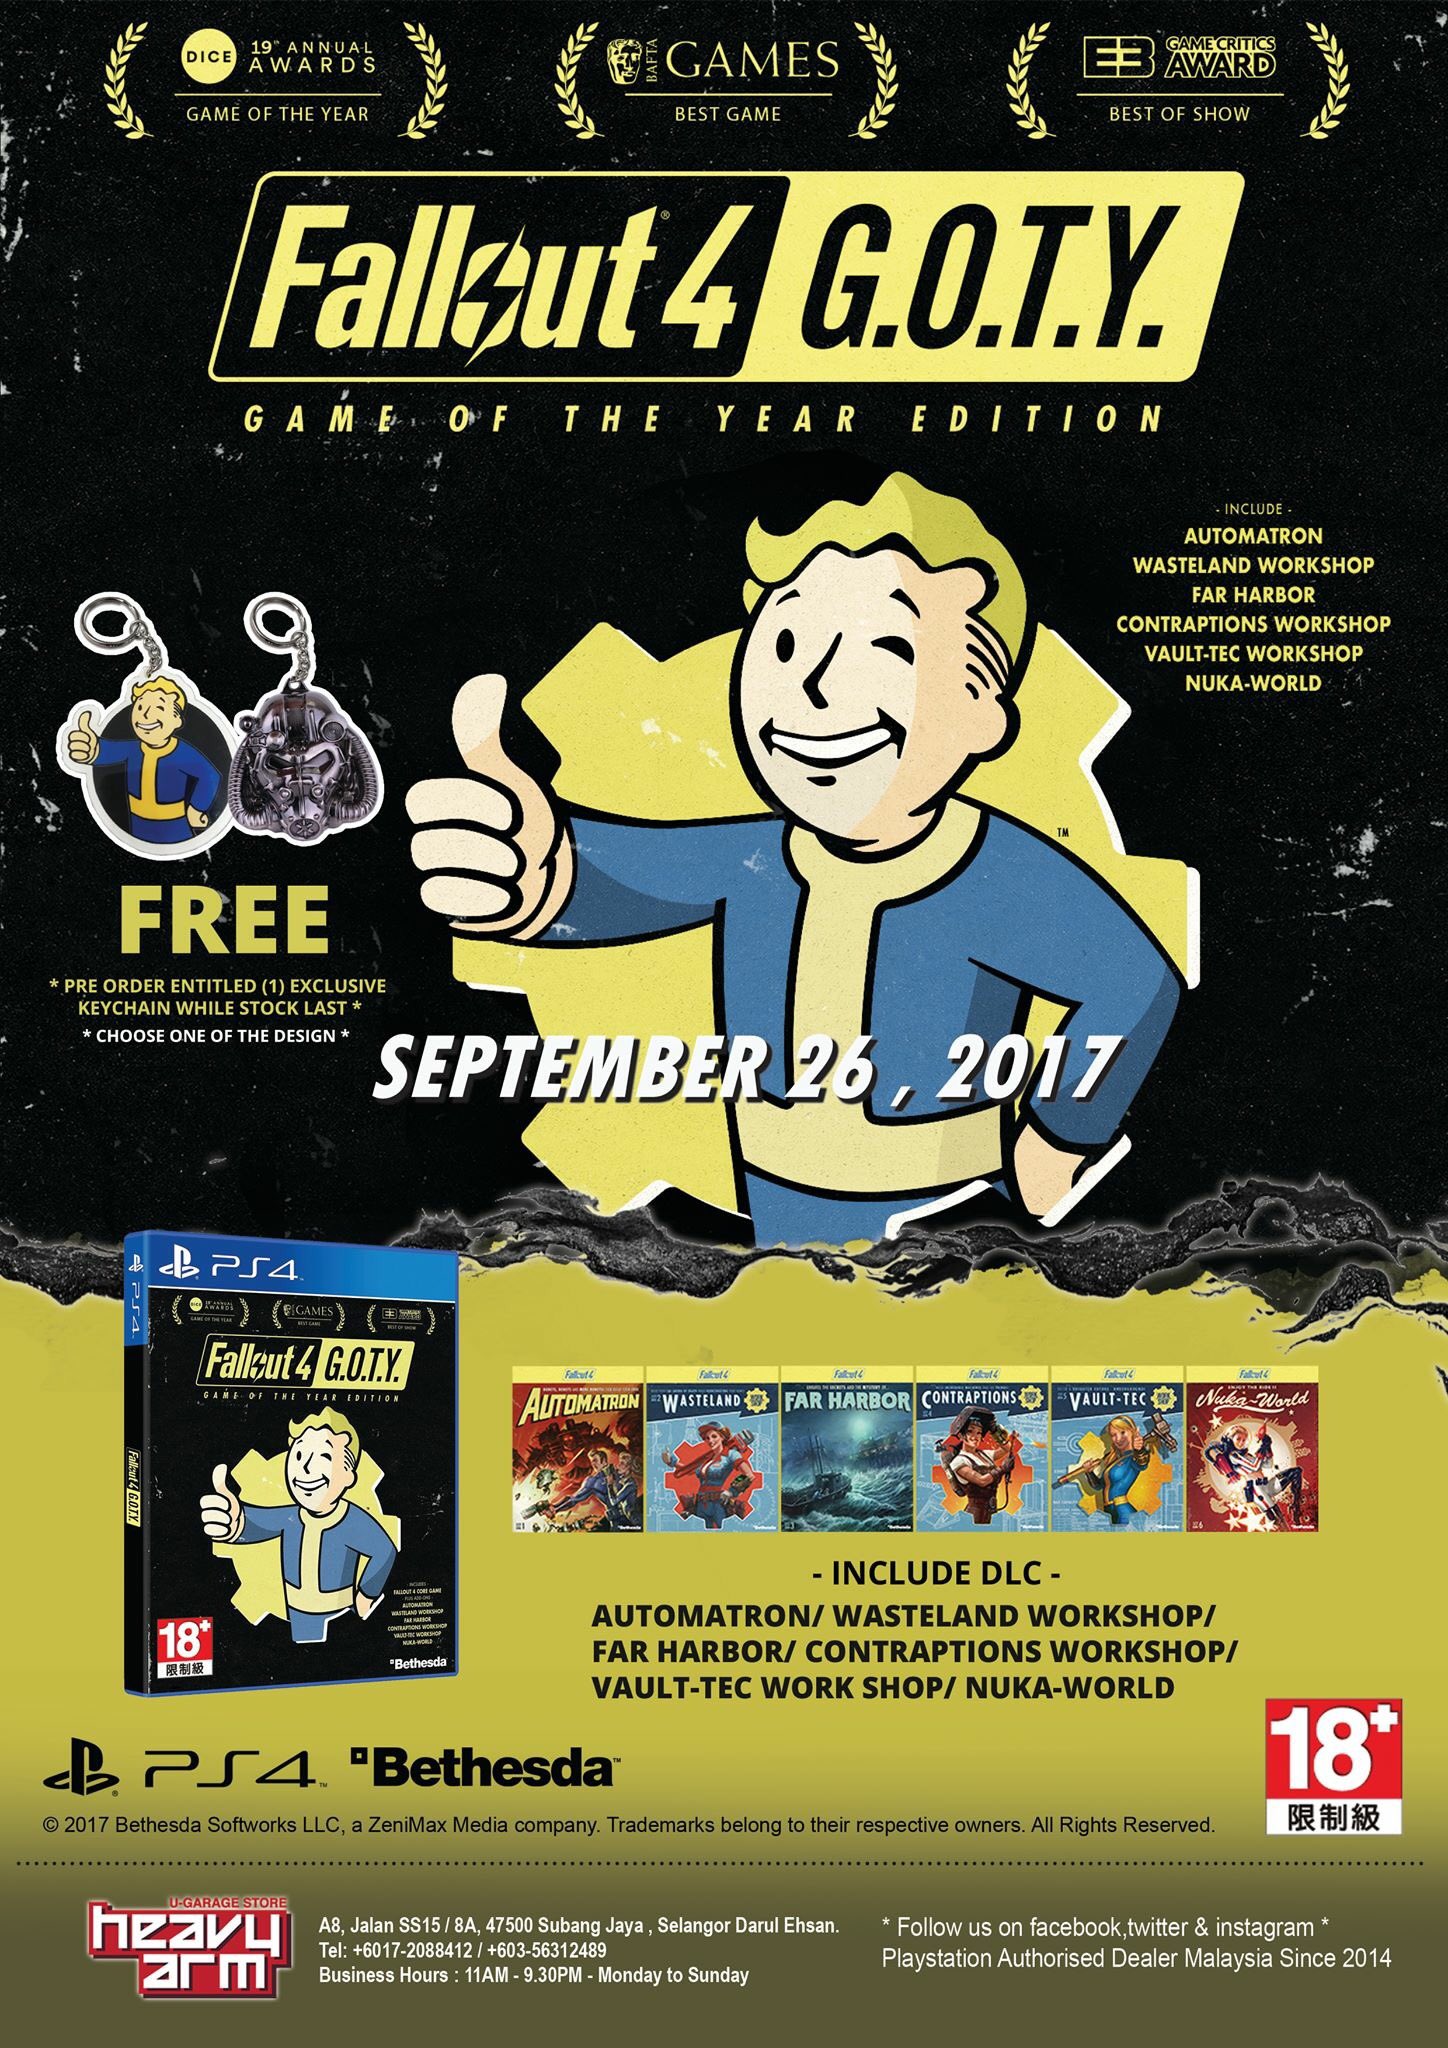 Heavyarm U Store Preorder Ps4 Fallout 4 Goty Now And Entitled Exclusive Keychain For Free Eta 26 September 17 T Co M68hi3omqk Twitter